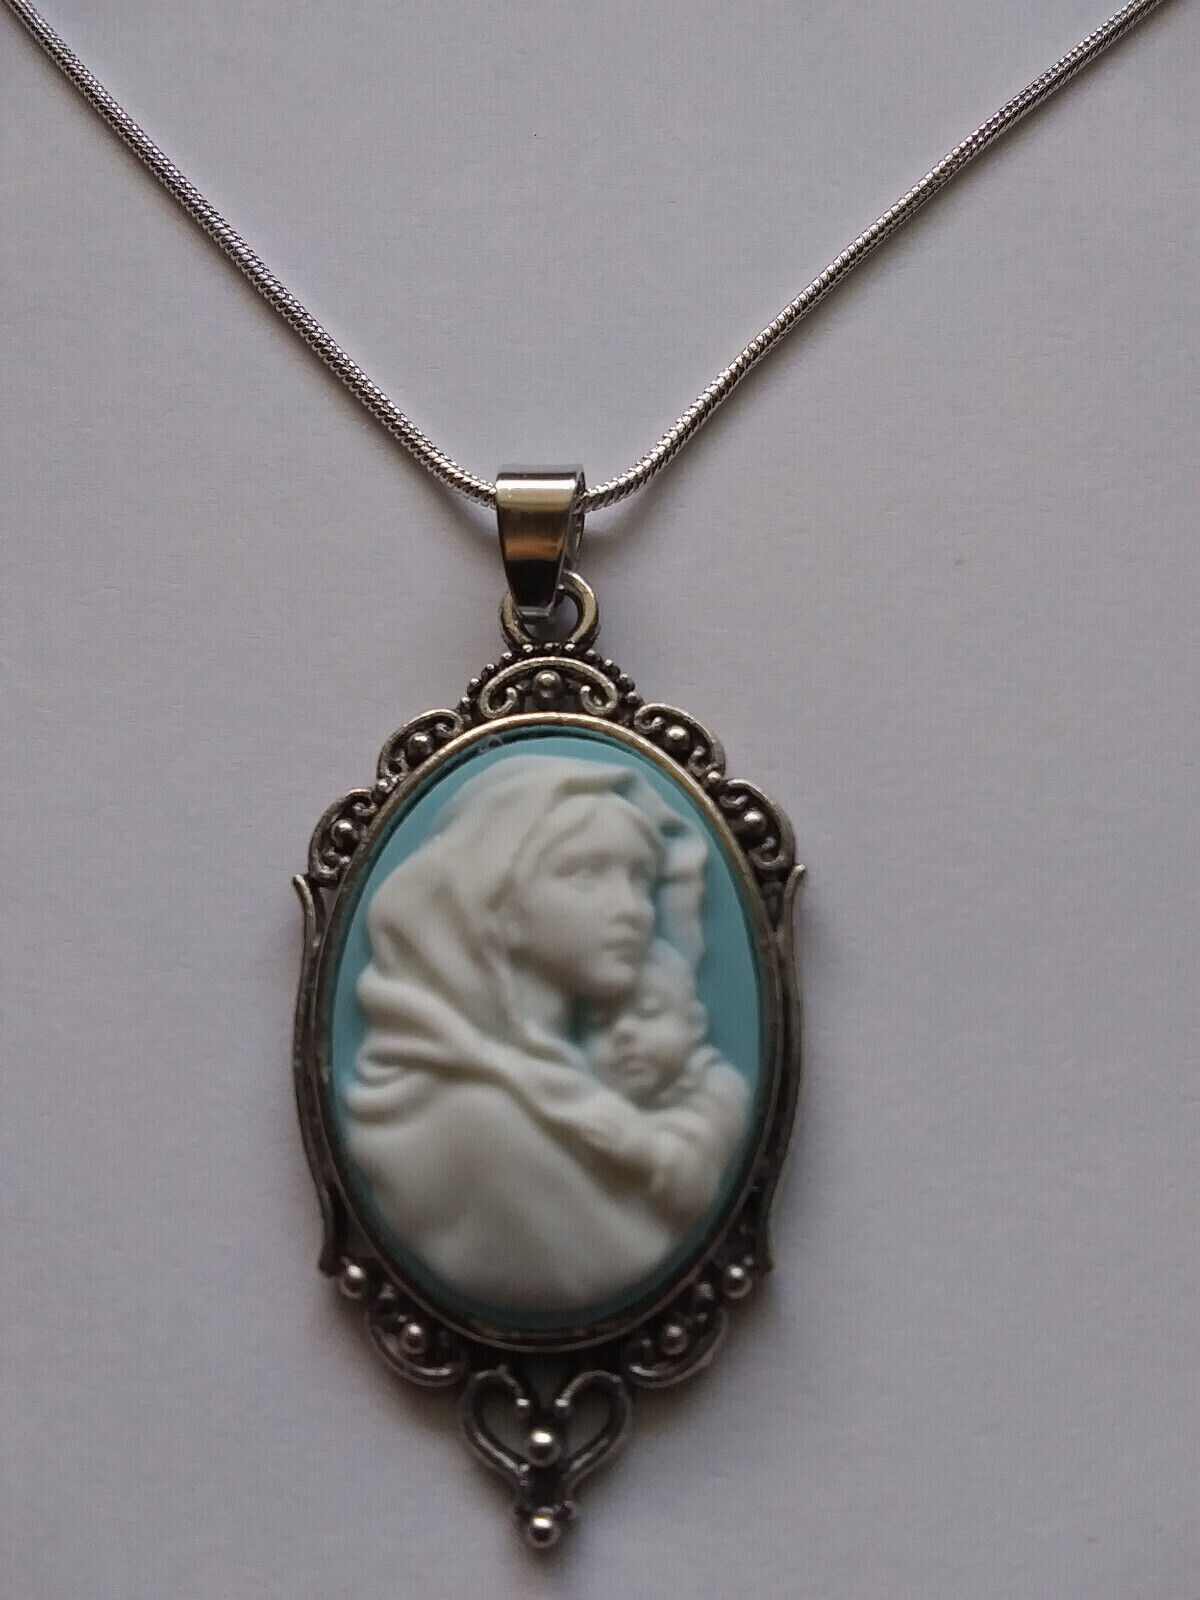 Mary Madonna & Child Pendant Wedgewood Blue Cameo necklace 925 sterling silver Handmade - фотография #2